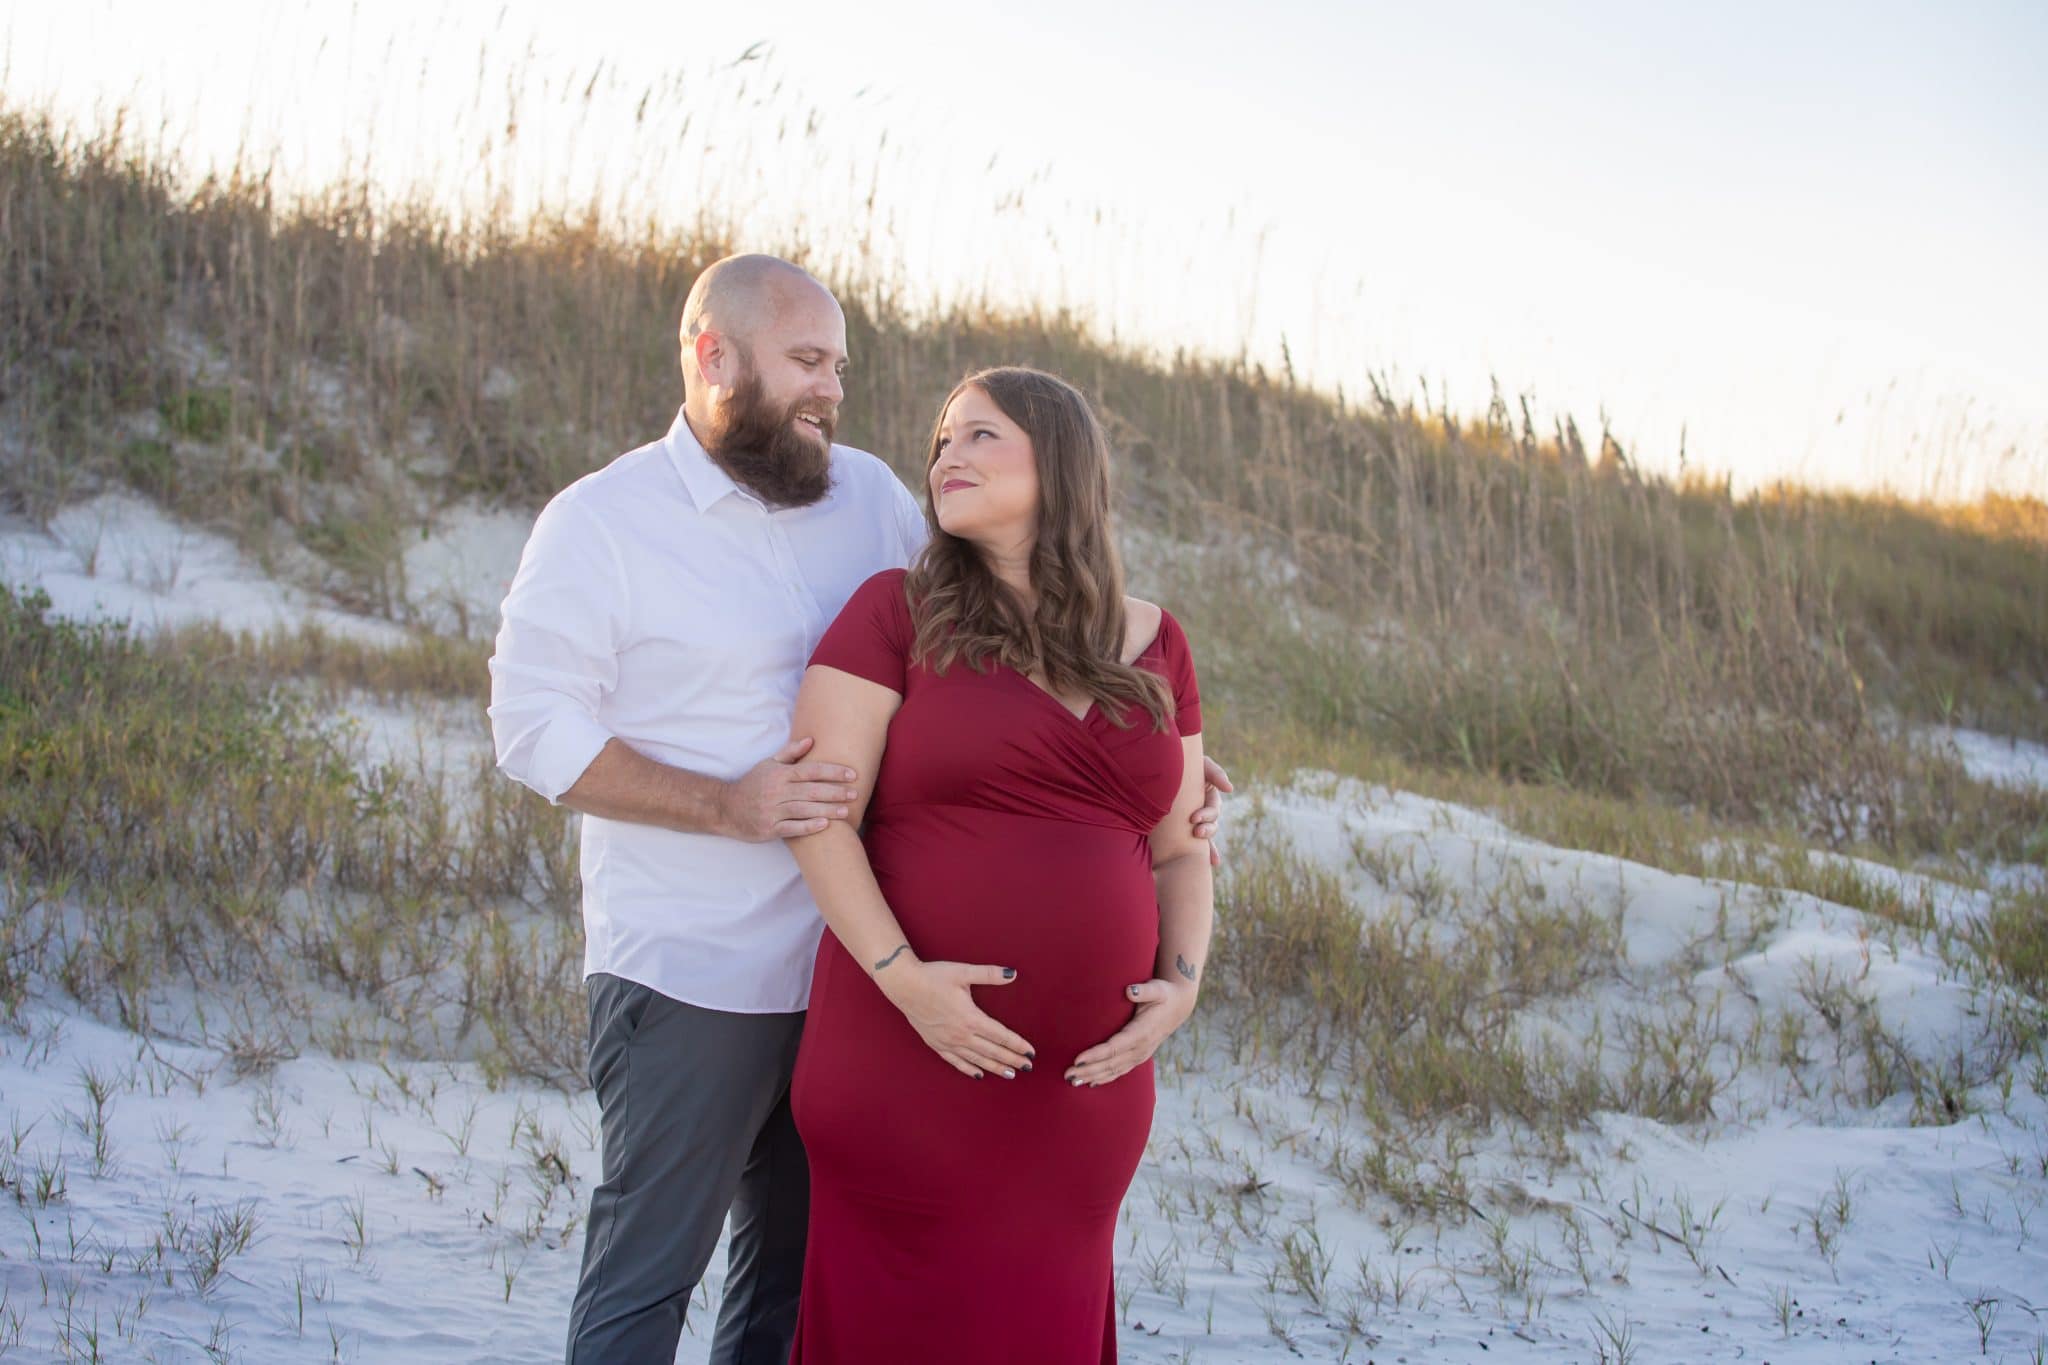 Maternity portrait of a couple at smyrna dunes park in New Smyrna Beach, FL at sunset with sand dunes in the 